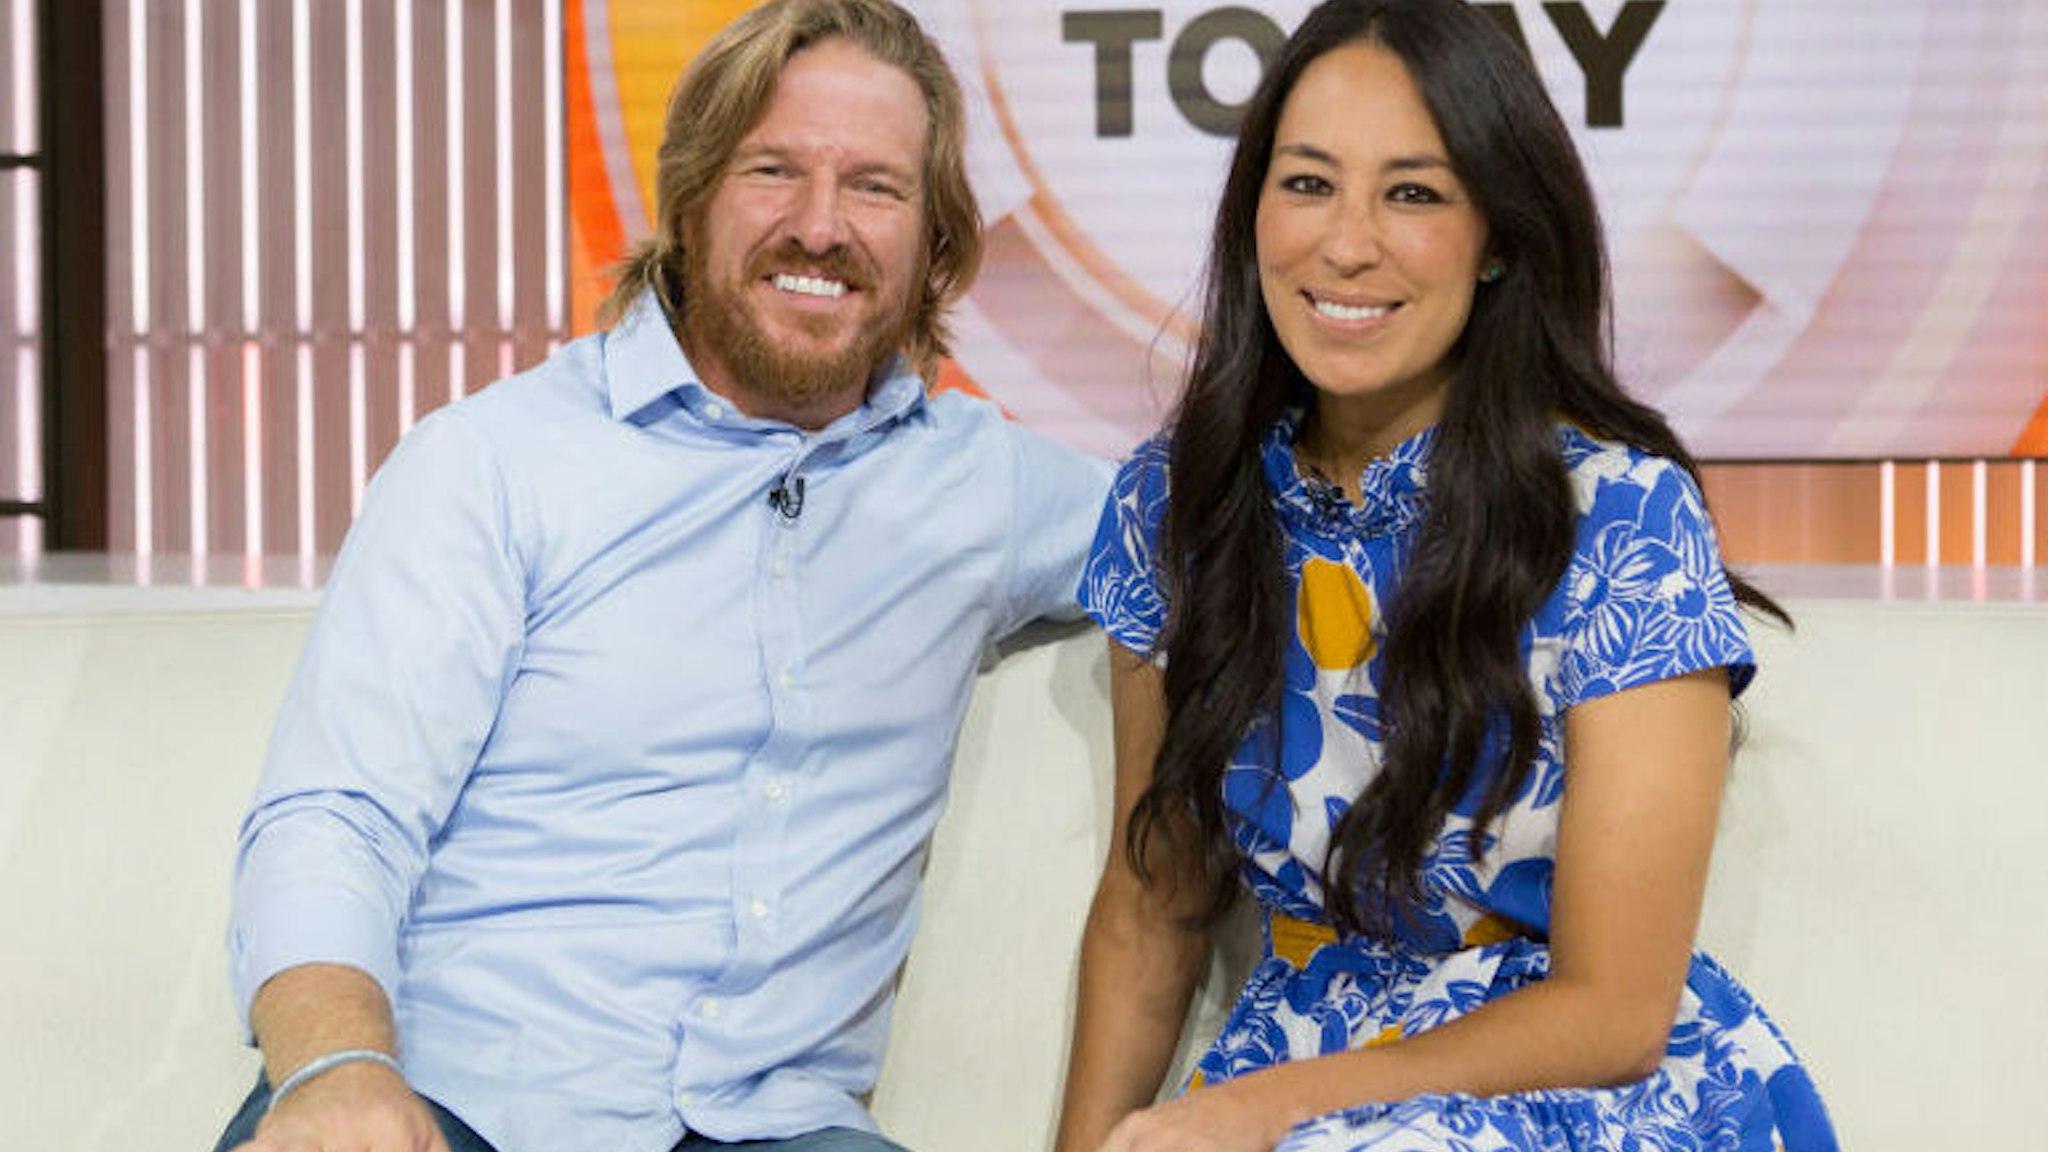 Chip and Joanna Gaines on Tuesday, July 18, 2017